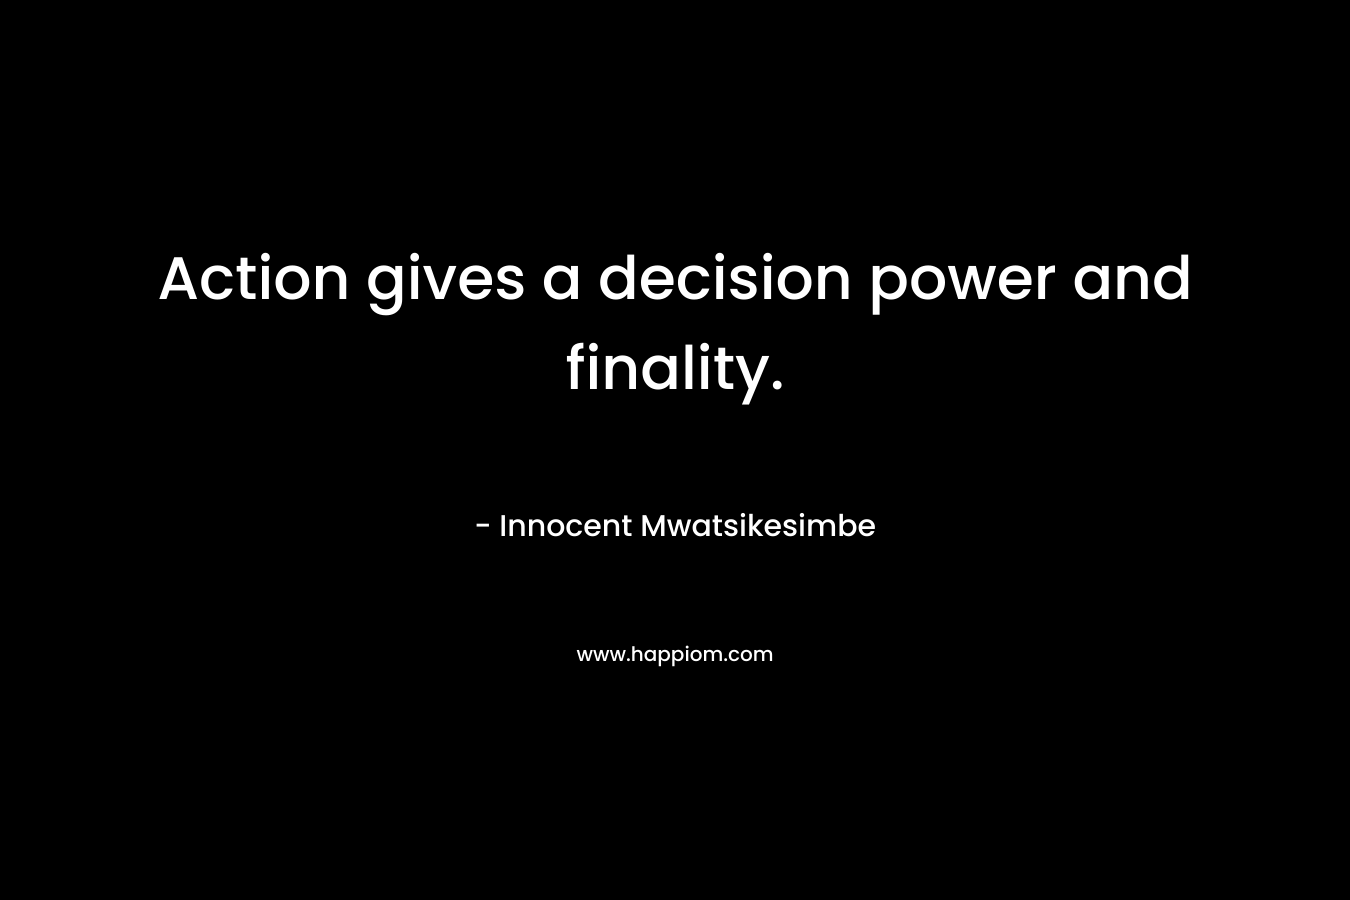 Action gives a decision power and finality. – Innocent Mwatsikesimbe